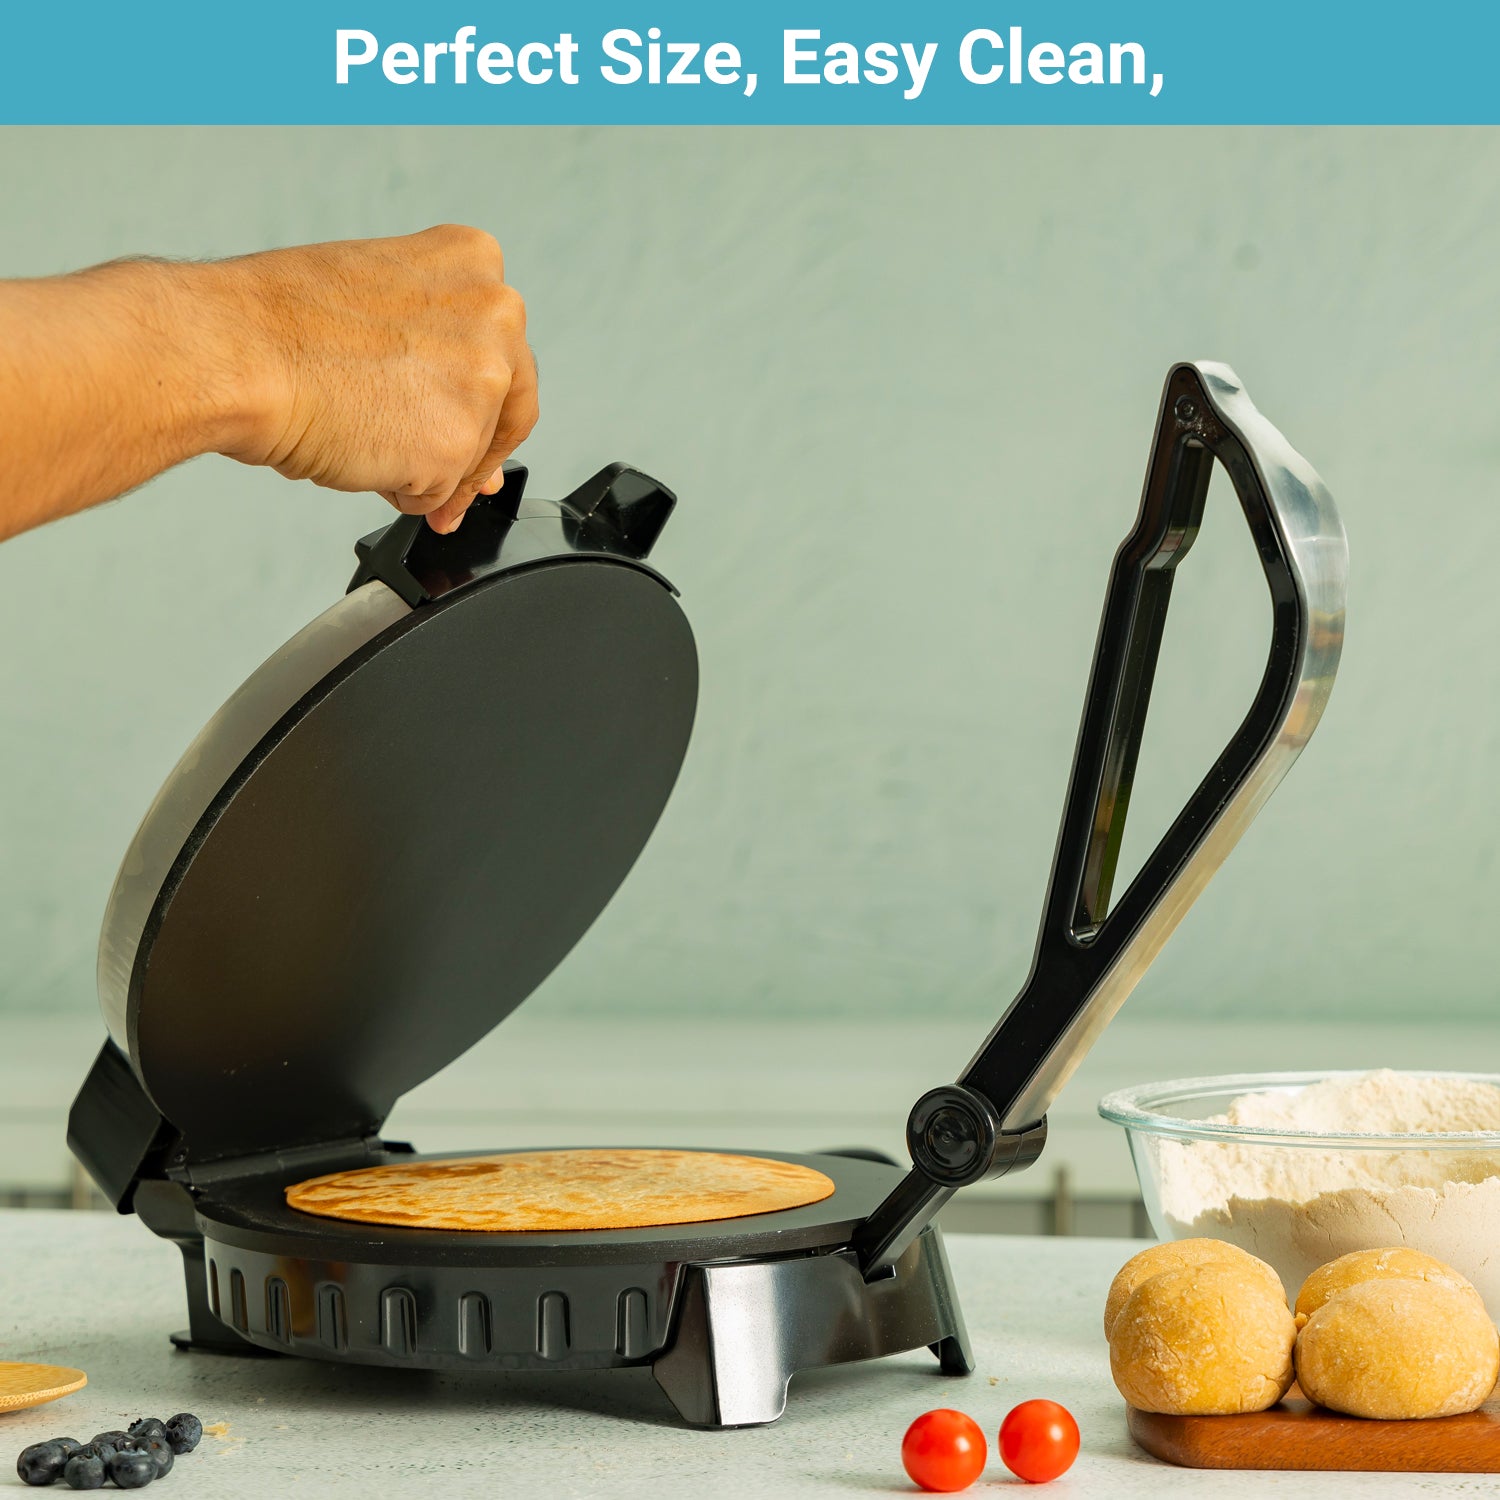 Geepas | For you. For life. Electric Chapati Maker & Tortilla Press 10" Toastie Maker